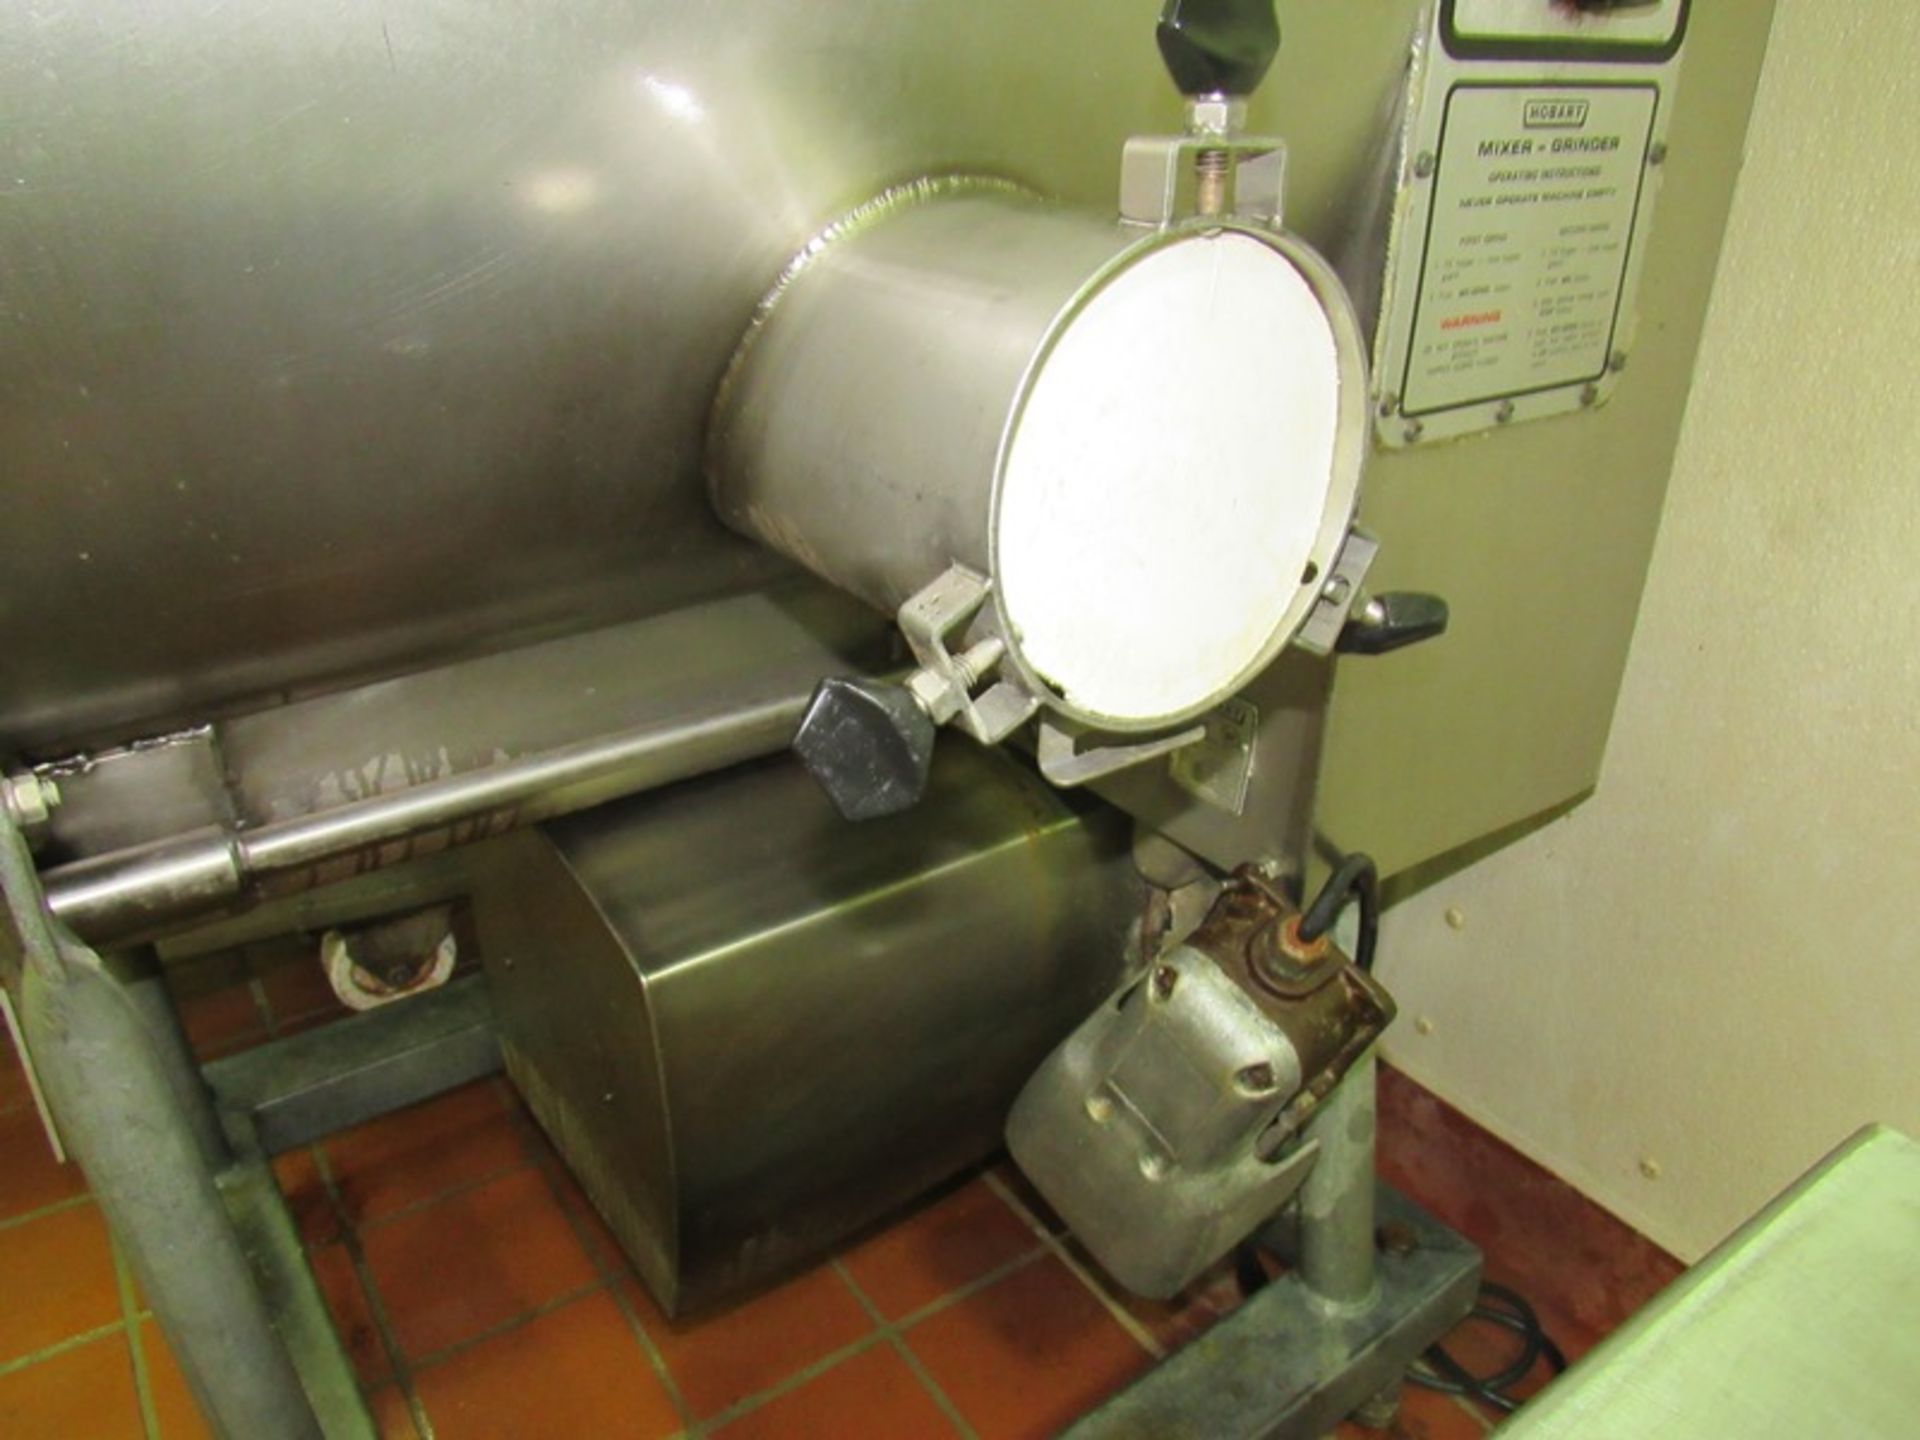 Hobart Mdl. 4352 Mixer/Grinder, 5" head, side automatic load port, foot pedal, 220 volts, 3 phase, - Image 4 of 7